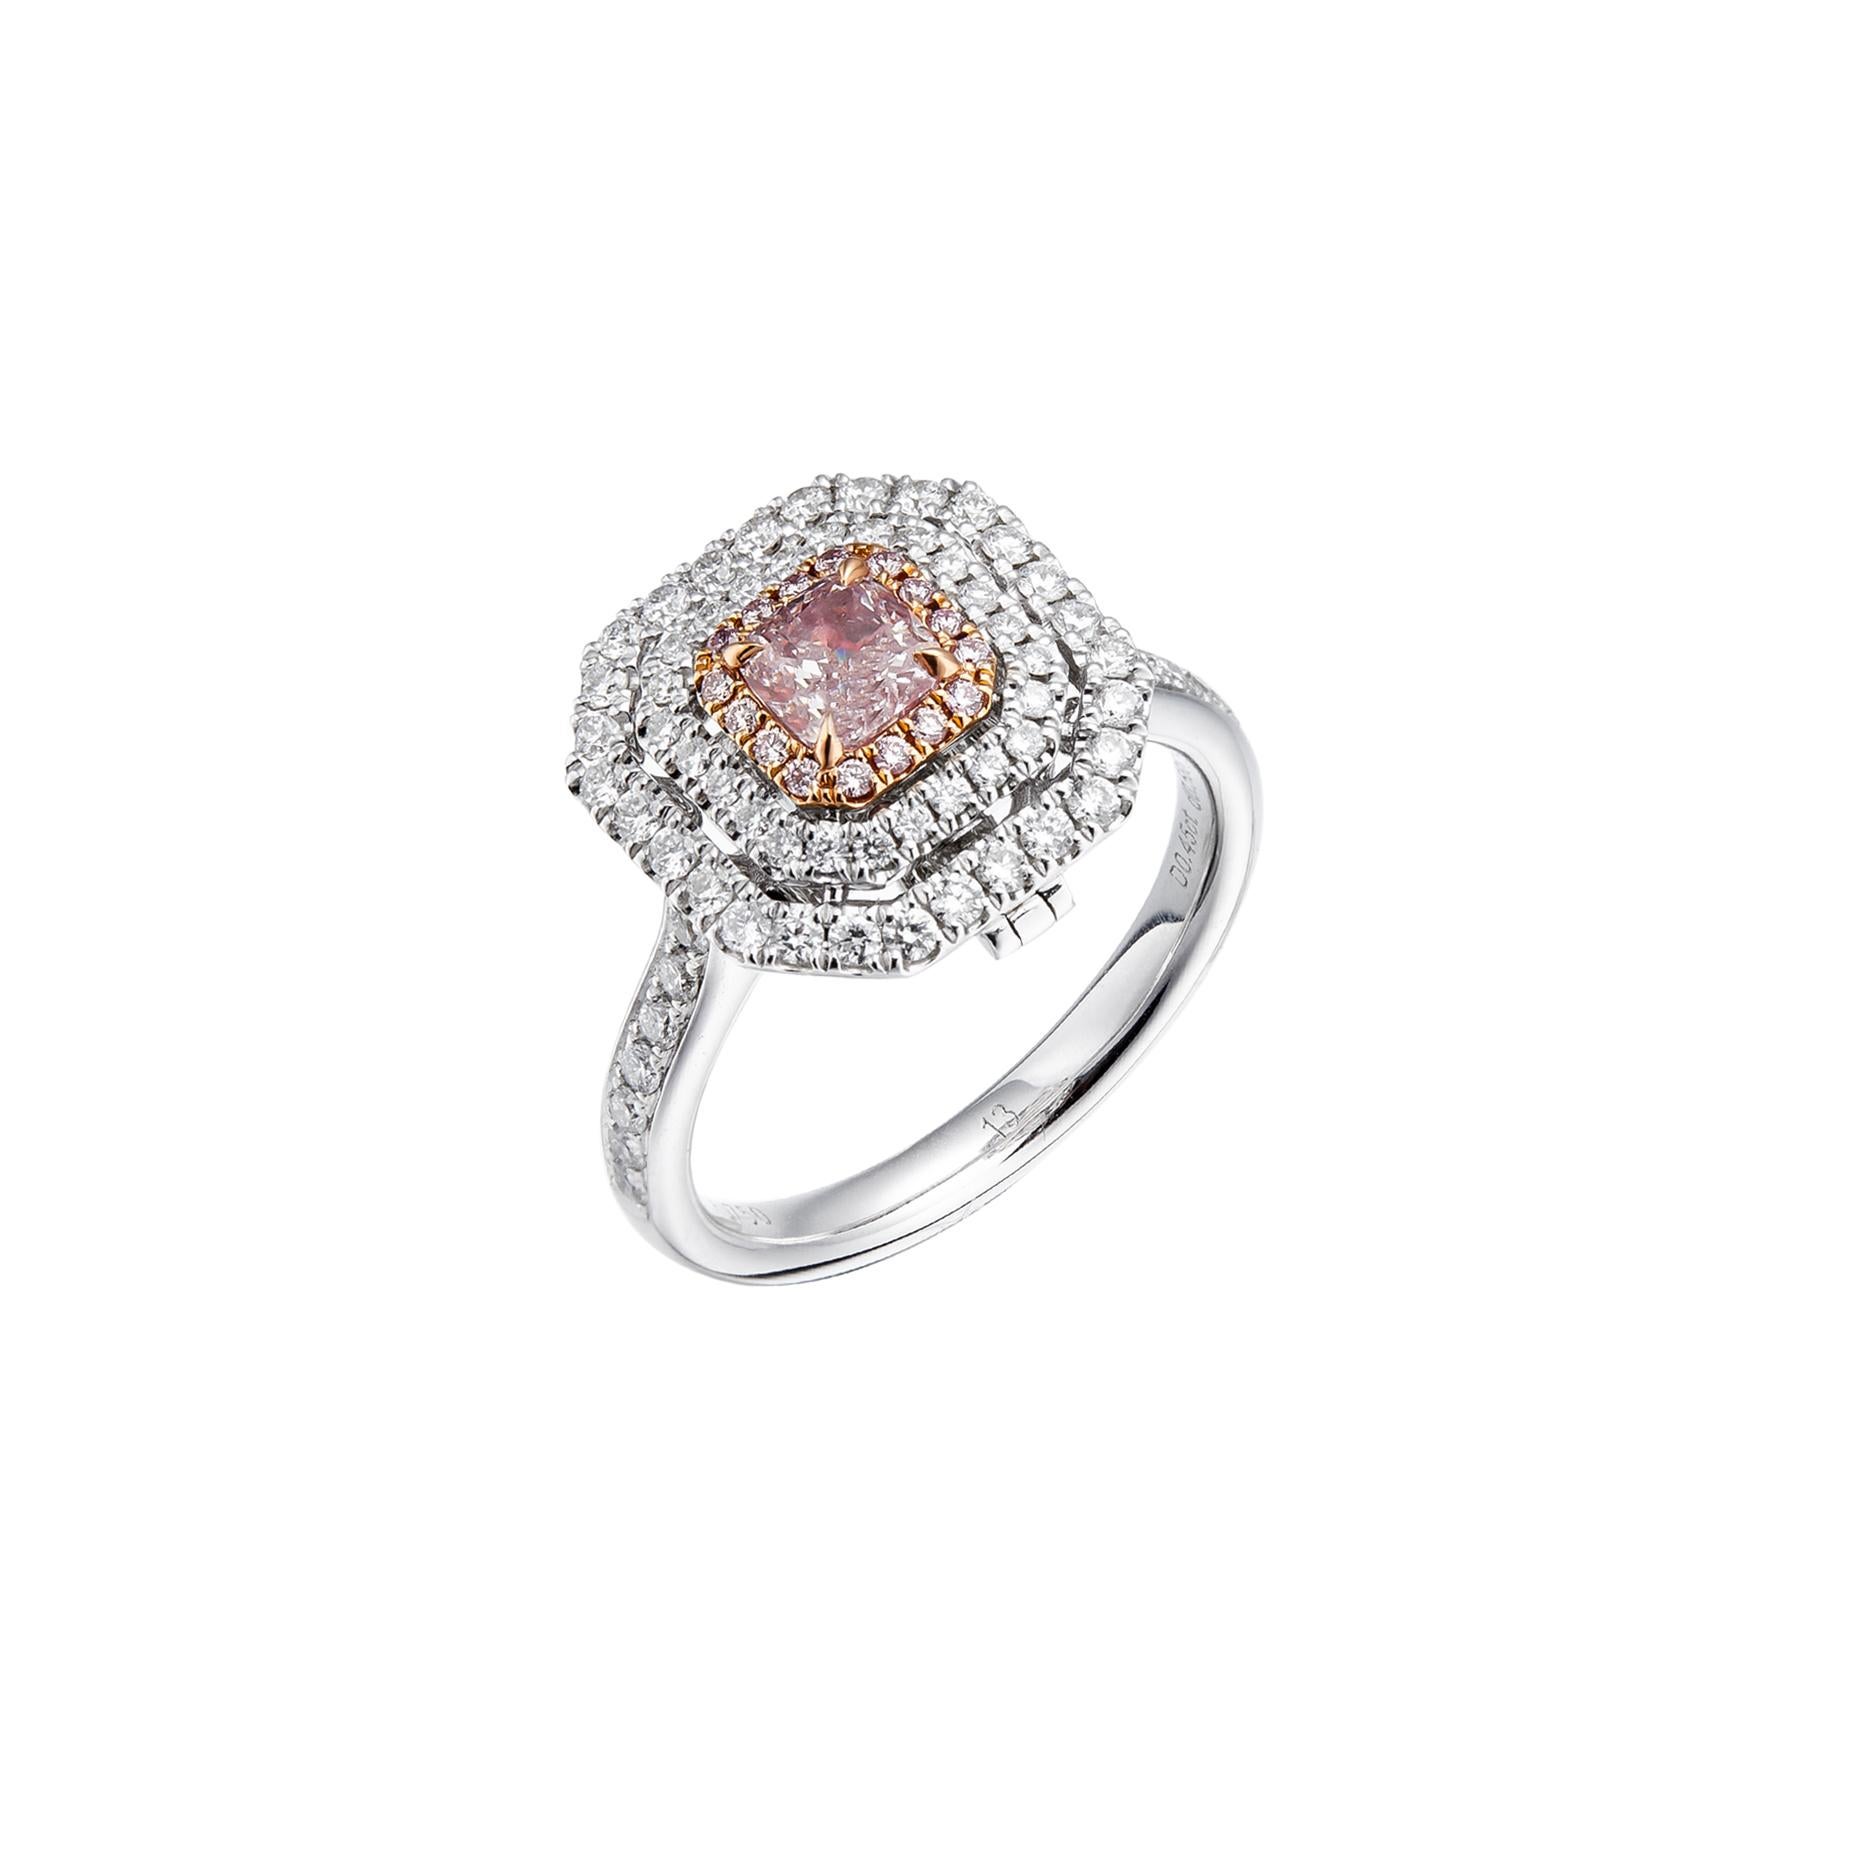 GIA-certified 0.45 carat natural pink diamond, mounted on high-quality 18KT gold. The pink diamond is surrounded by a geometrically set halo of small brilliant cut pink diamonds, adding depth and dimension to the design.

The pink diamond halo is